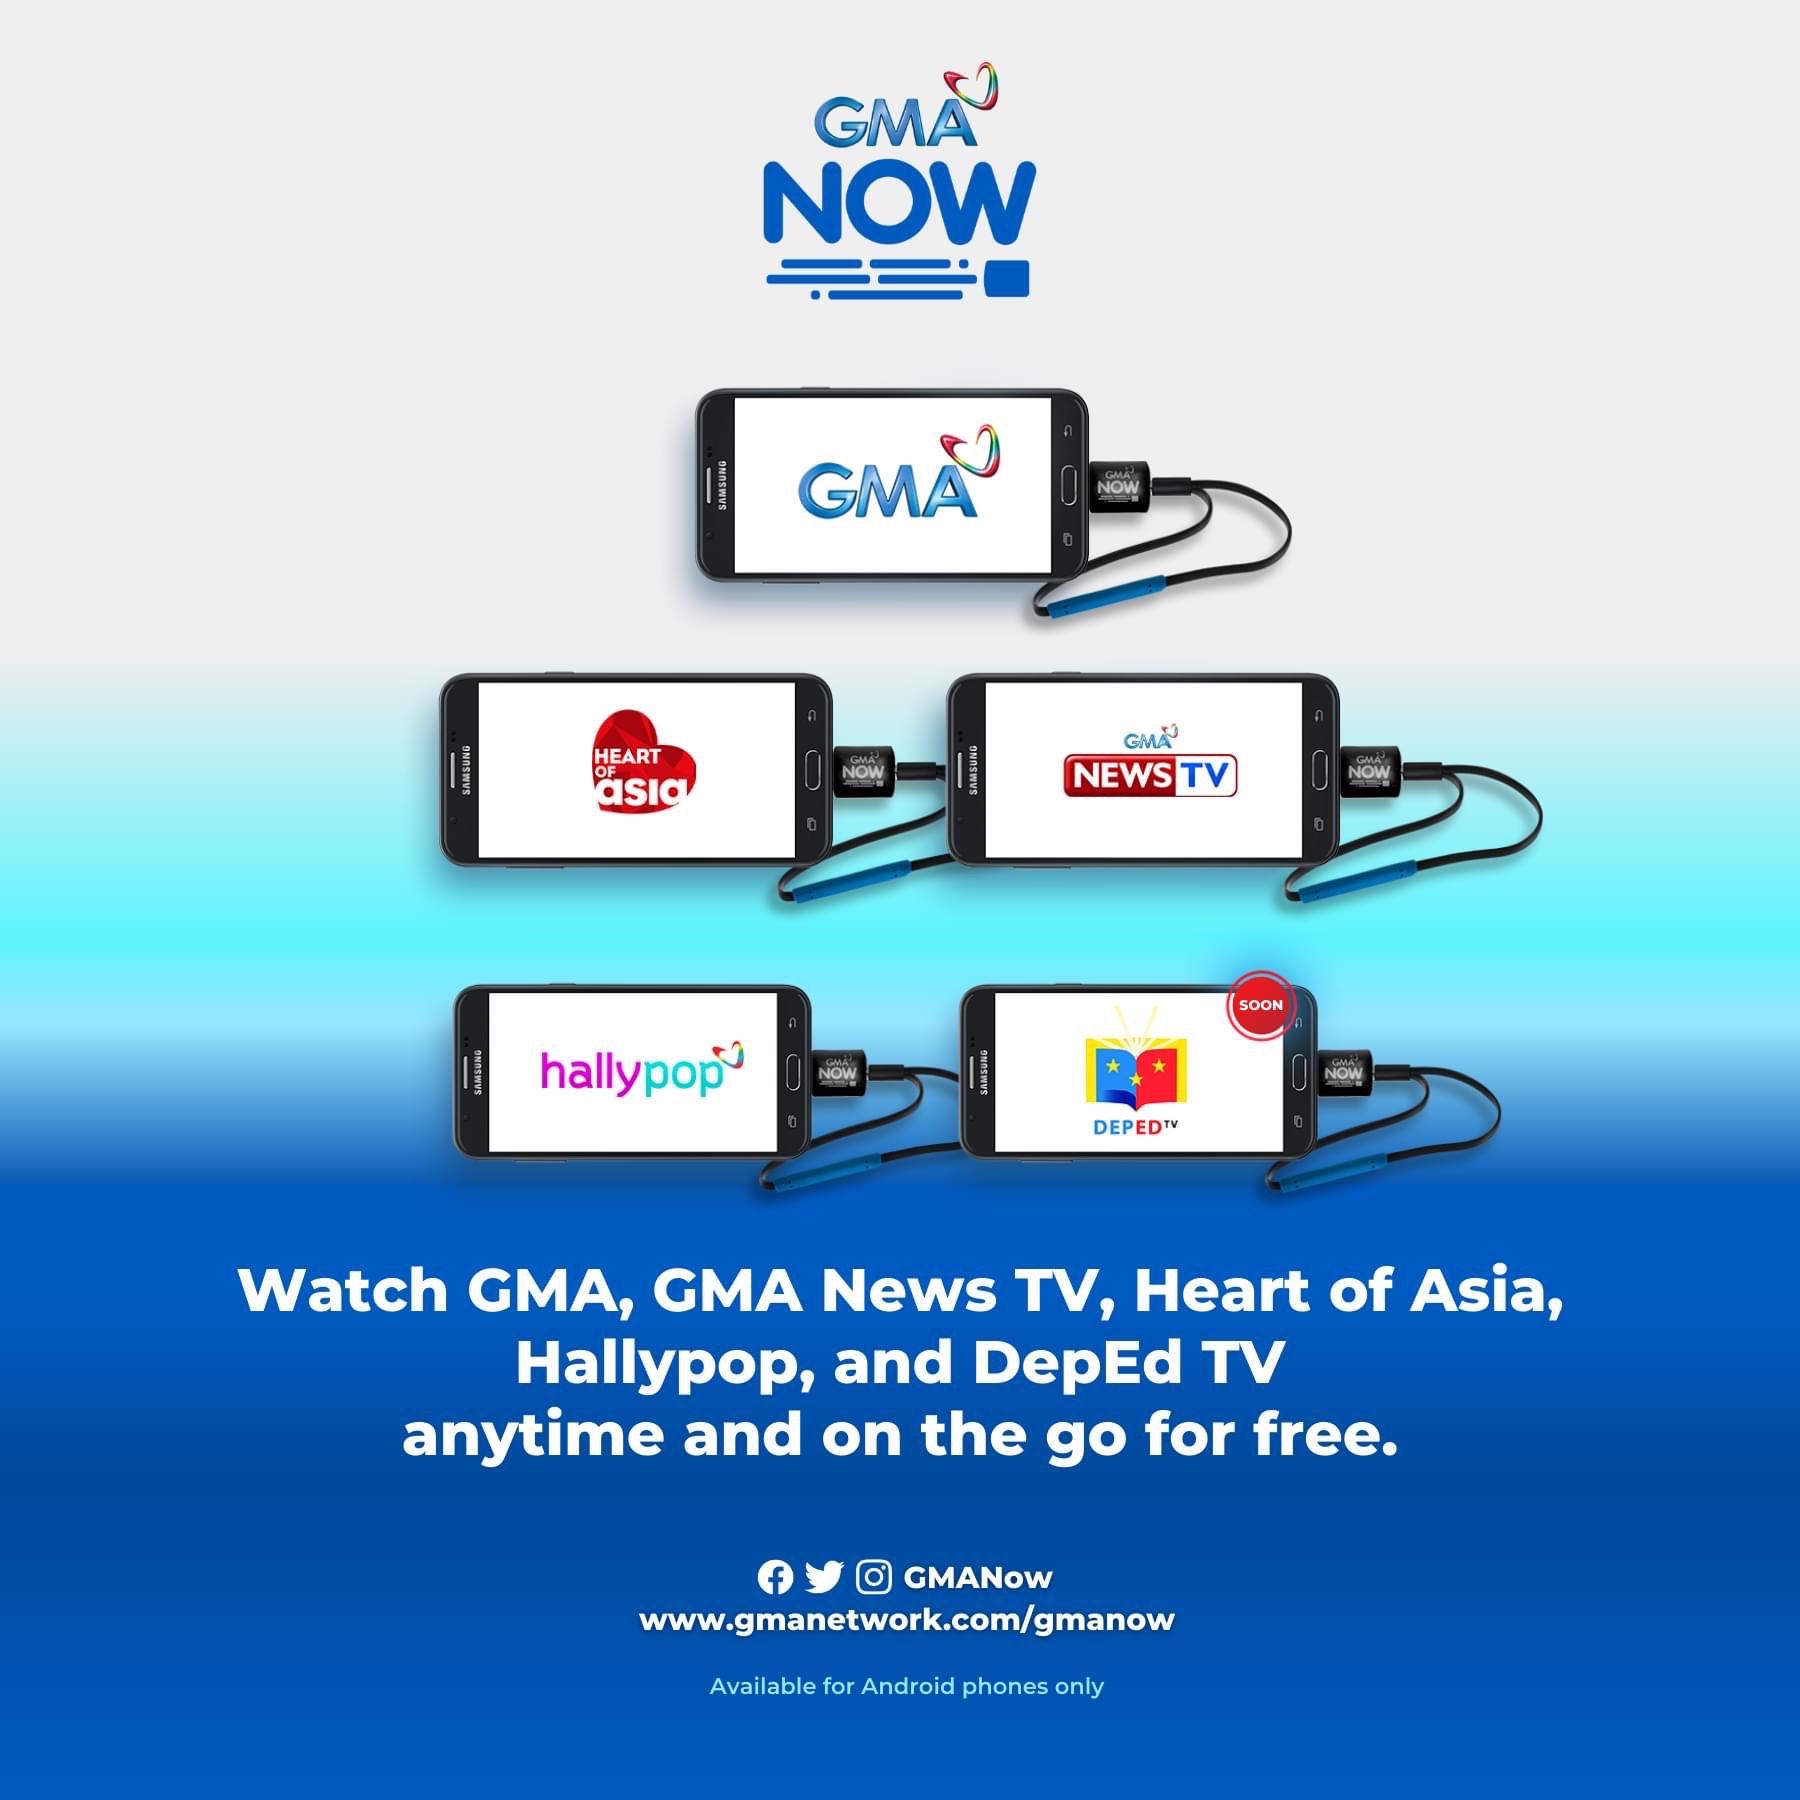 GMA now product feature